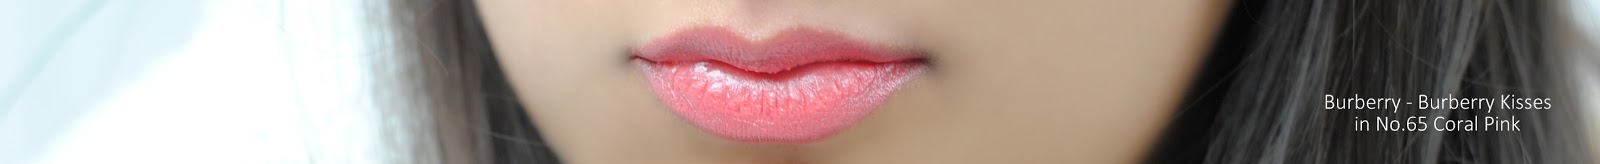 burberry kisses lipstick review Coral Pink swatches